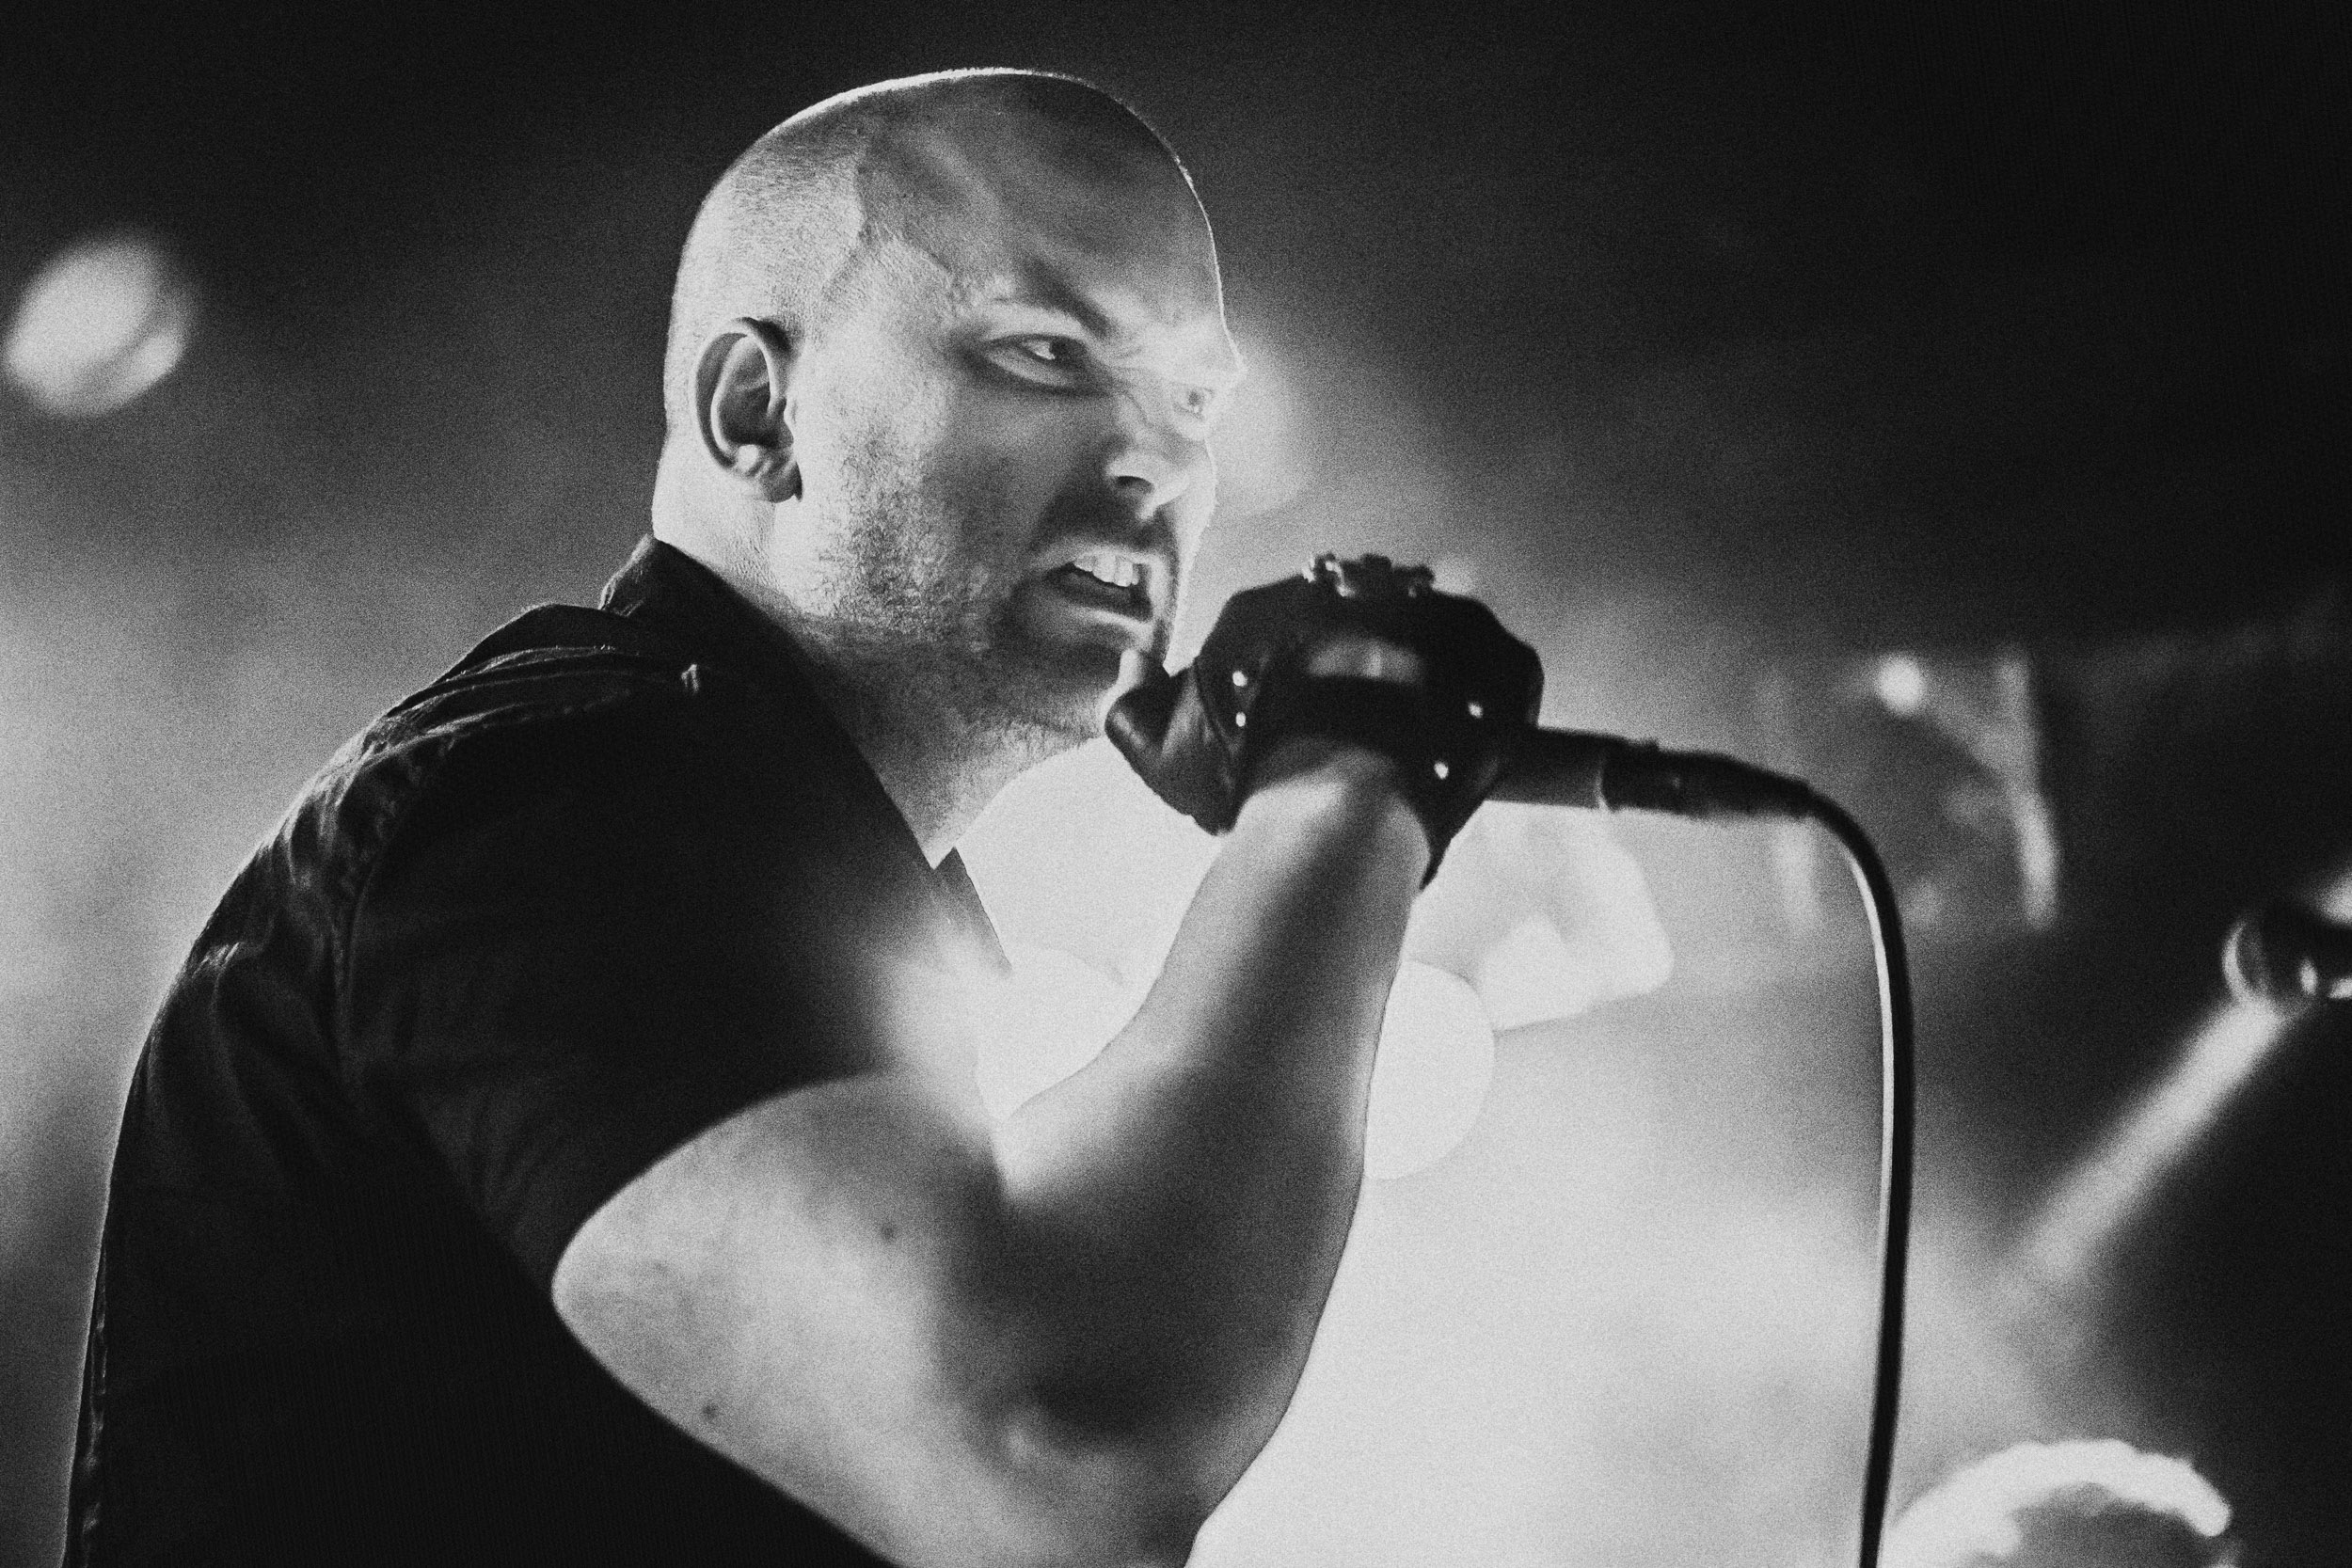 Live at Inferno festival (2013)